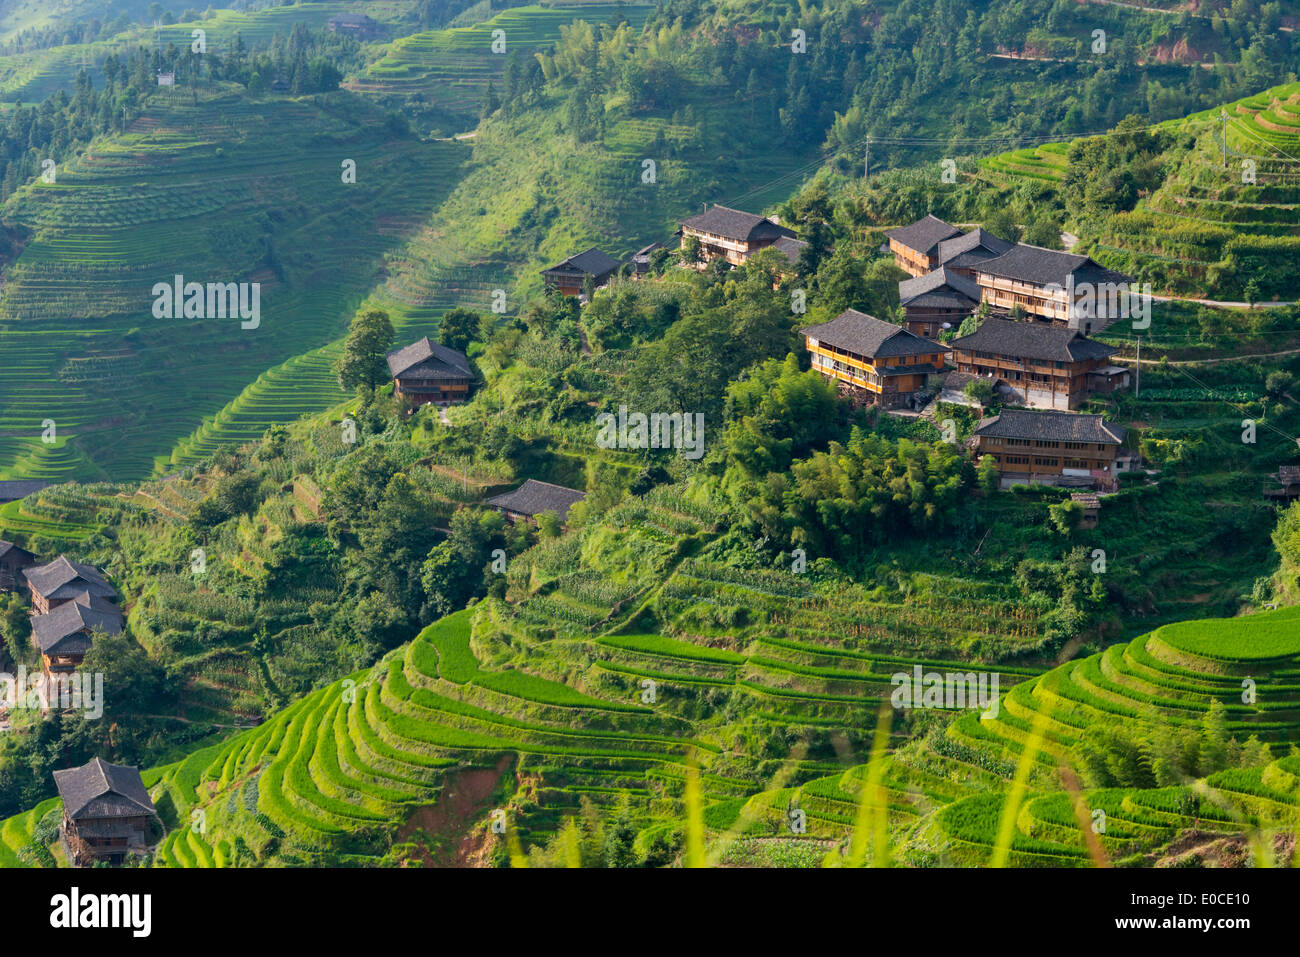 Village house and rice terraces in the mountain, Longsheng, Guangxi Province, China Stock Photo